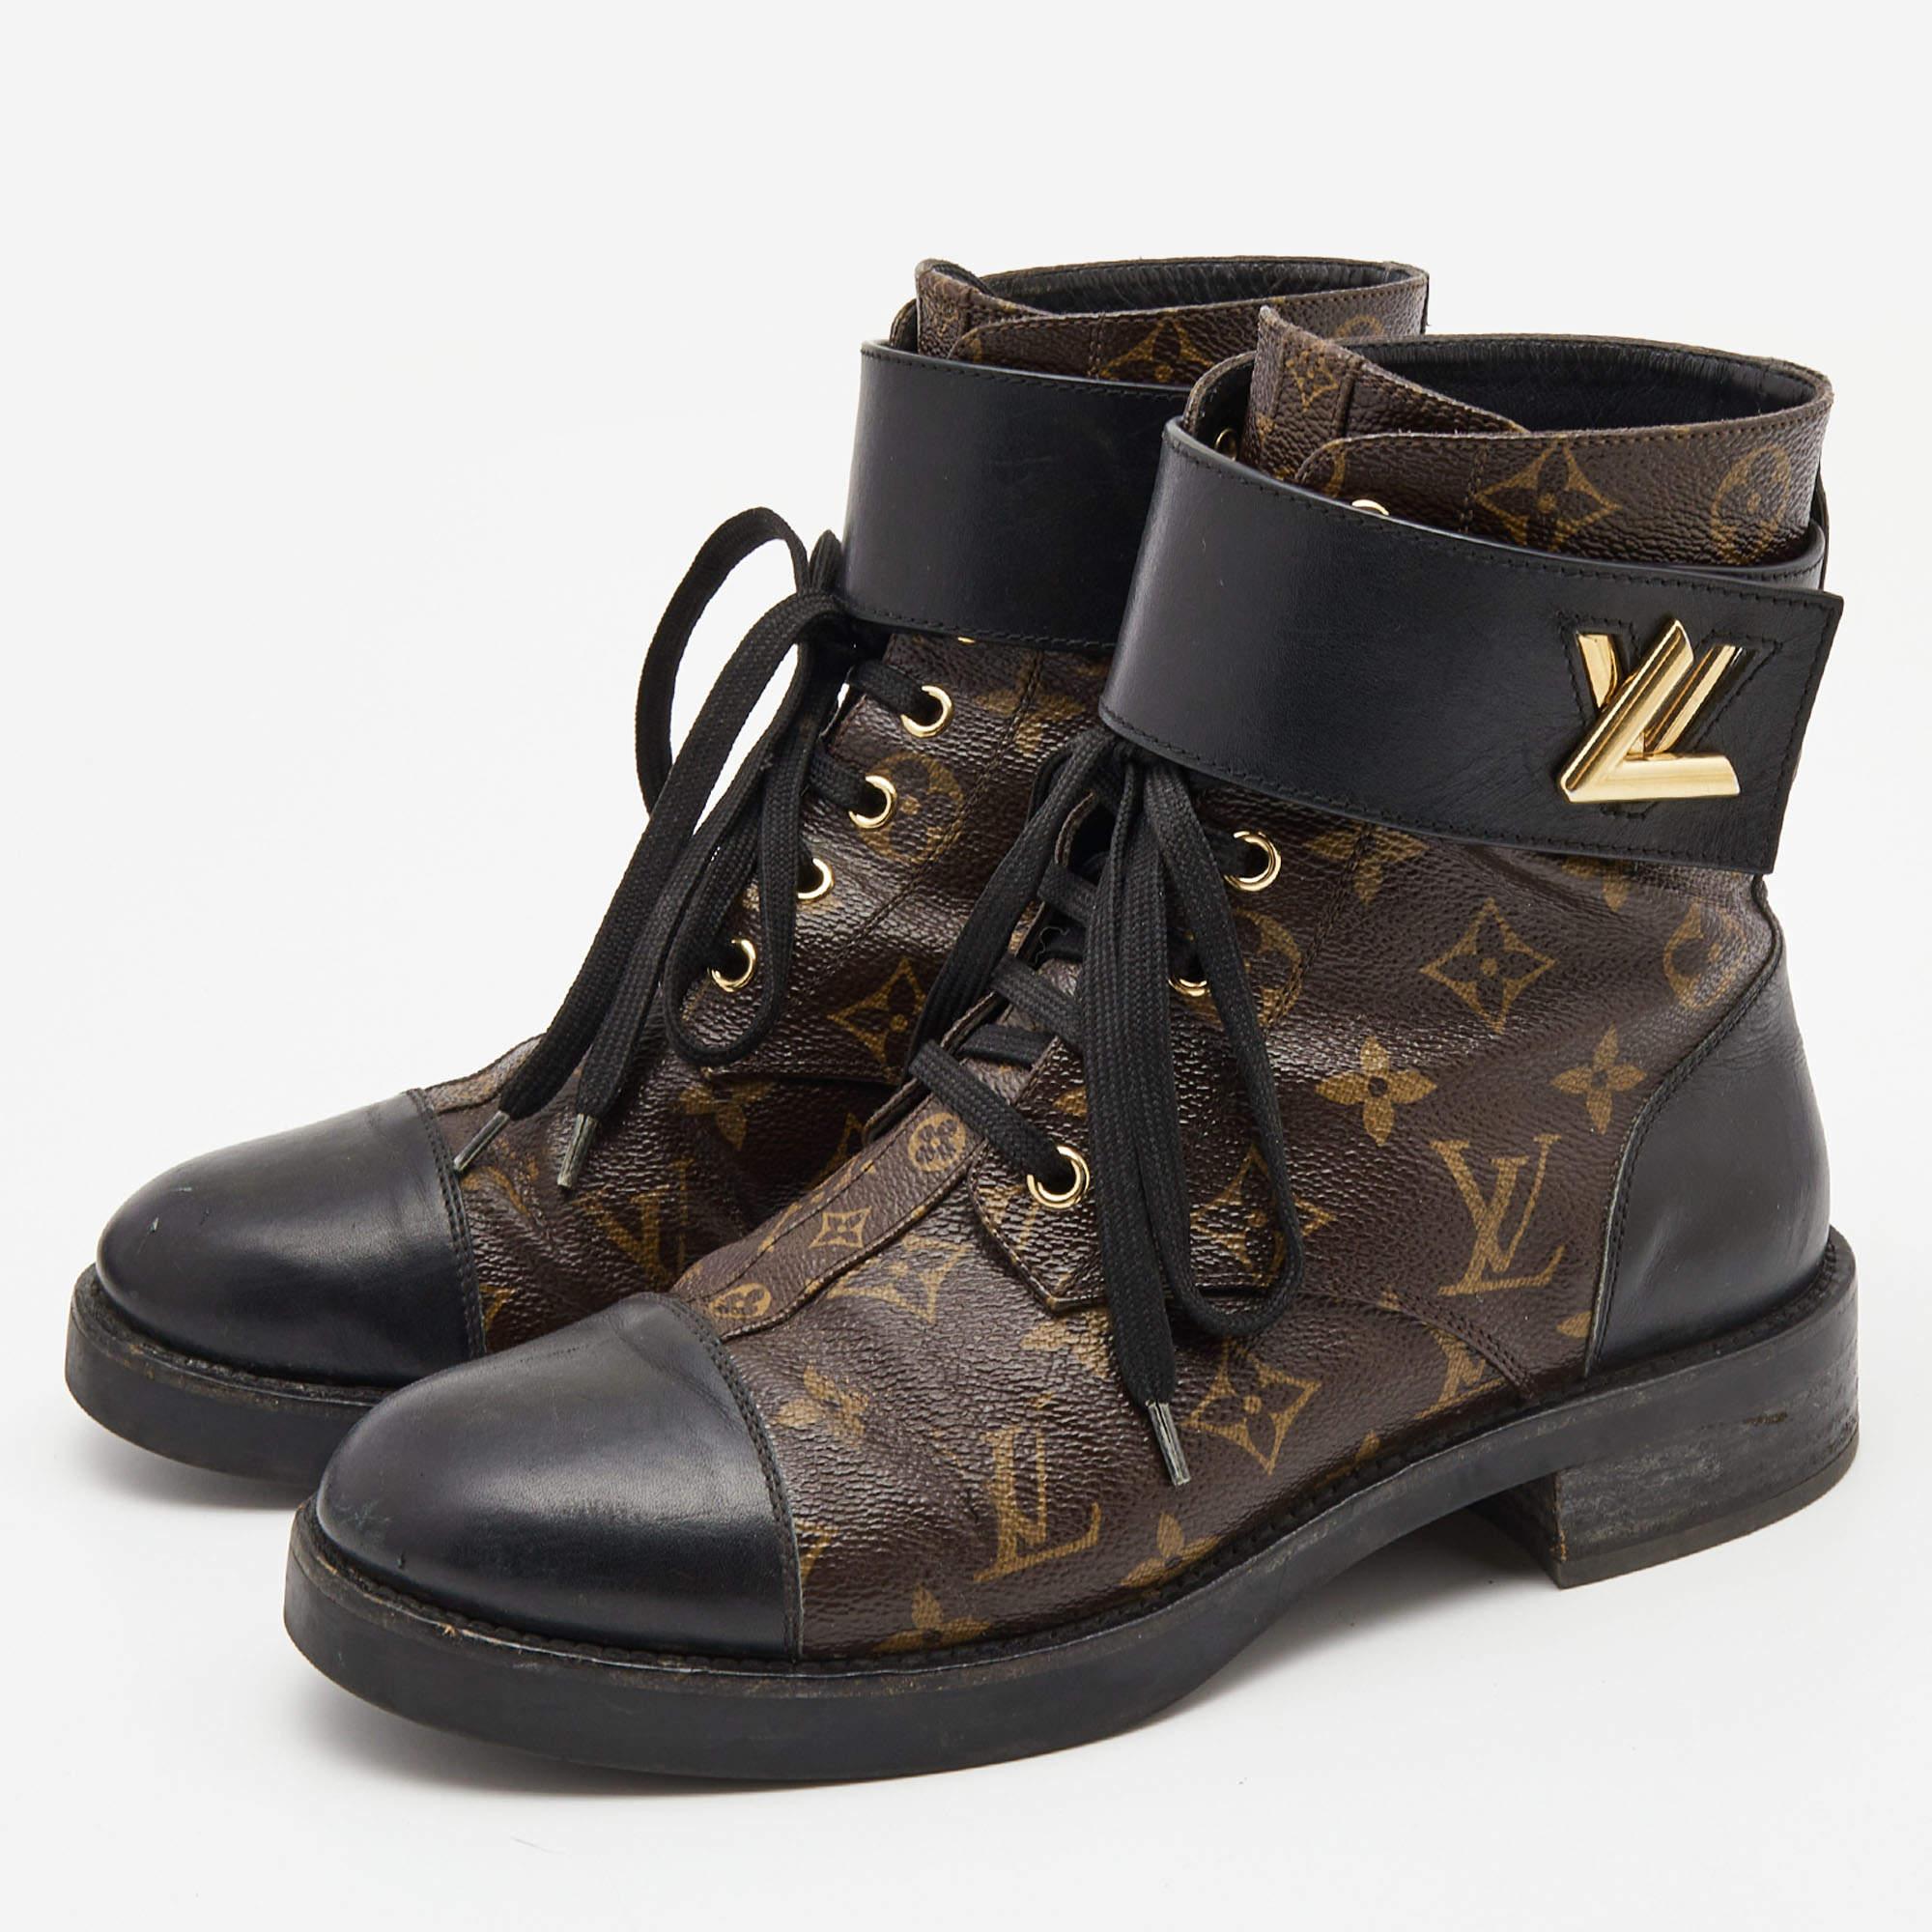 Enjoy the most fashionable days with these stylish Louis Vuitton boots. Modern in design and craftsmanship, they are fashioned to keep you comfortable and chic!

